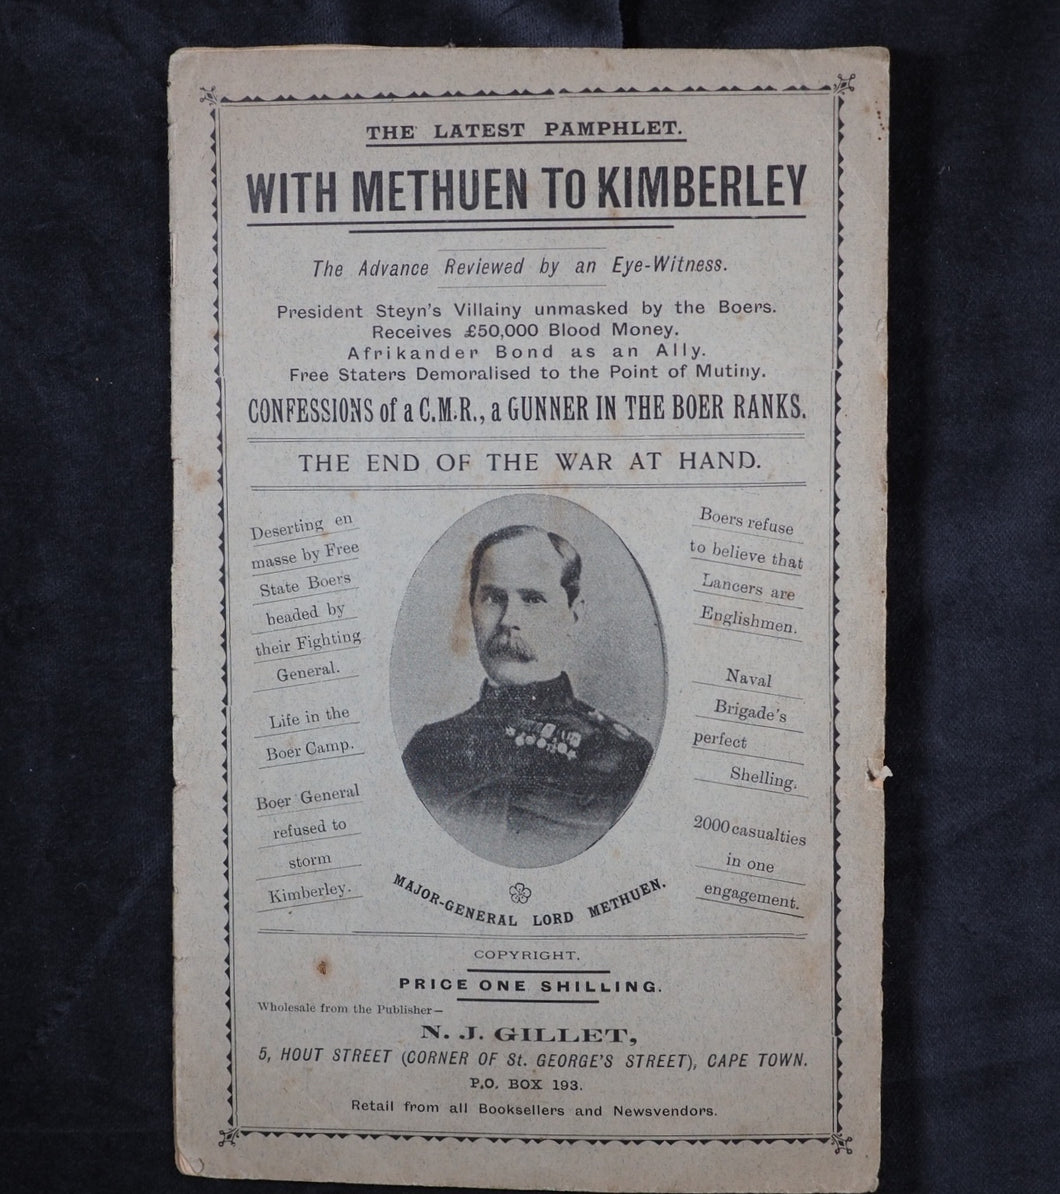 With Methuen to Kimberley : the advance reviewed by an eyewitness.  N.J. Gillet, Cape Town, [1900]